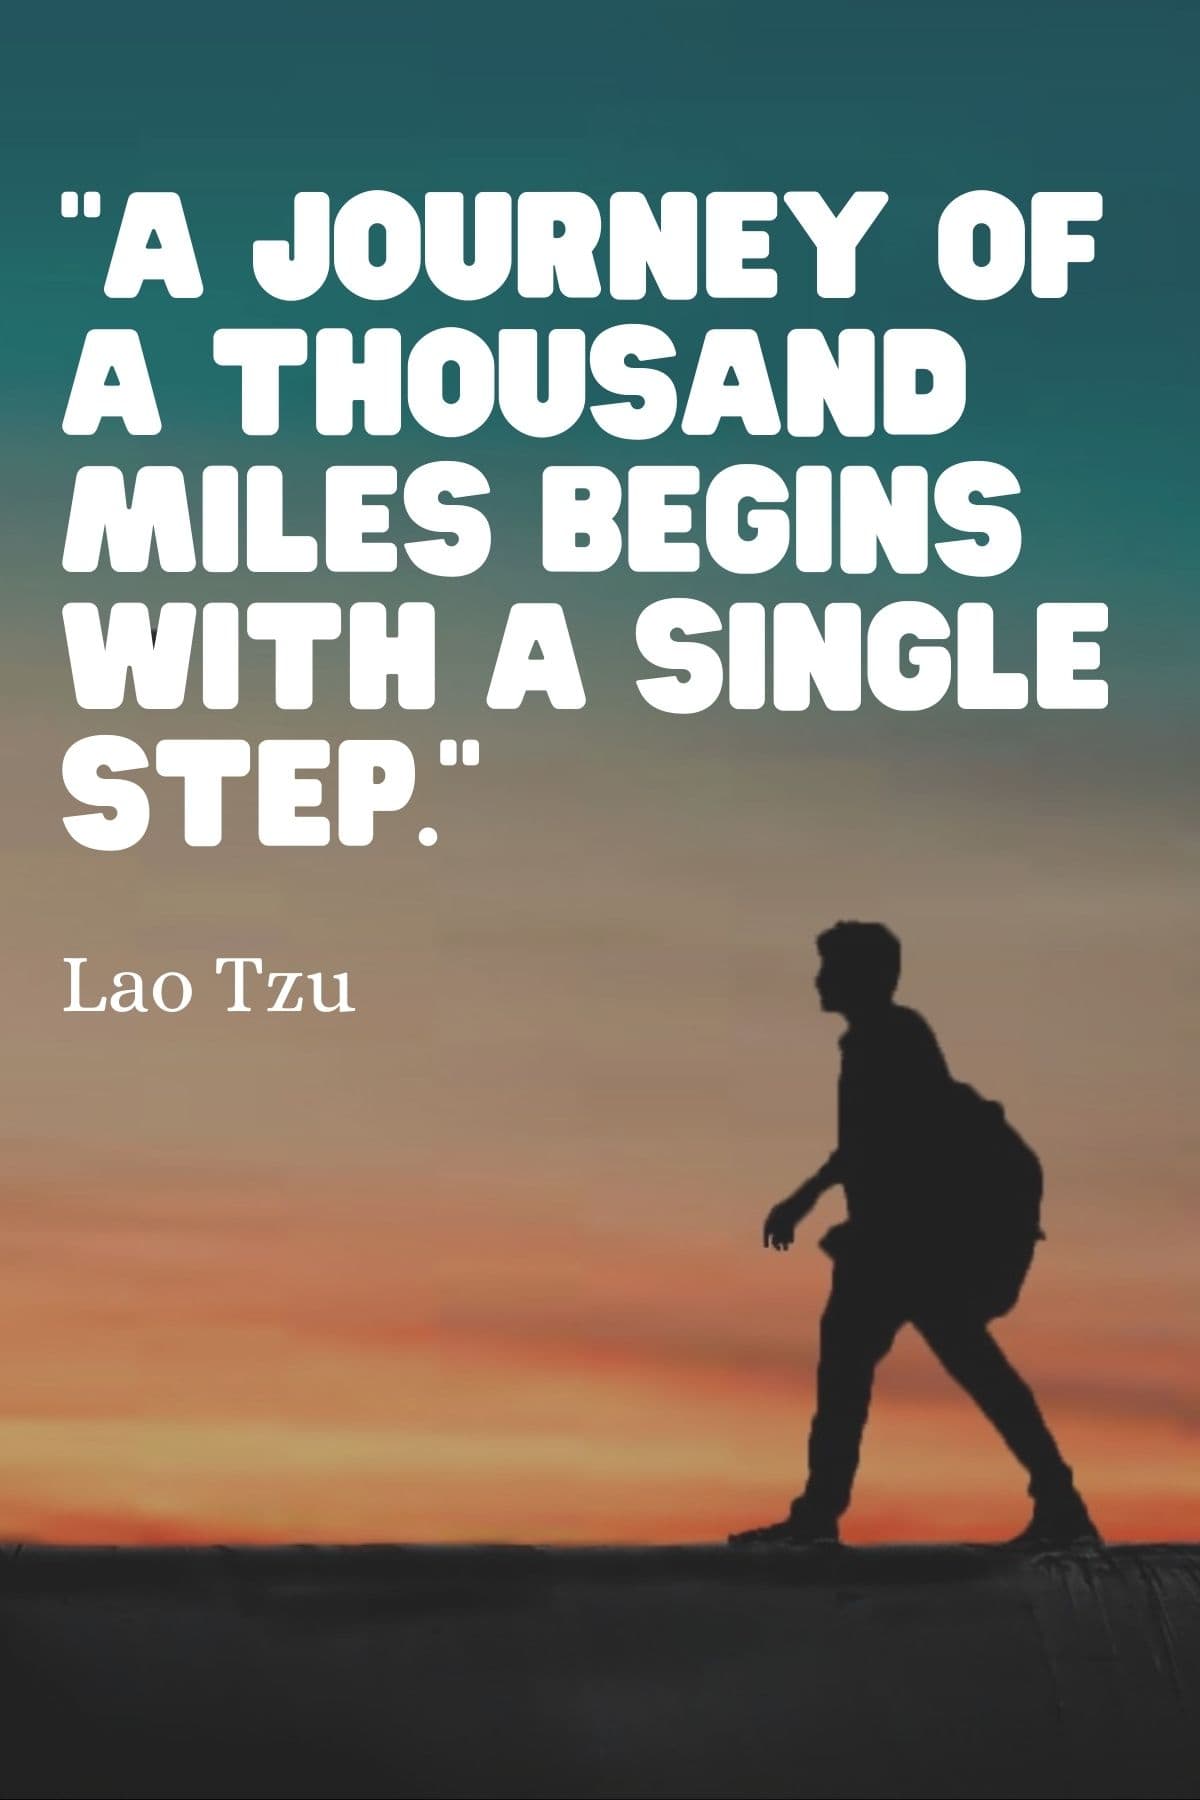 “A journey of a thousand miles begins with a single step.” – Lao Tzu fresh start quote